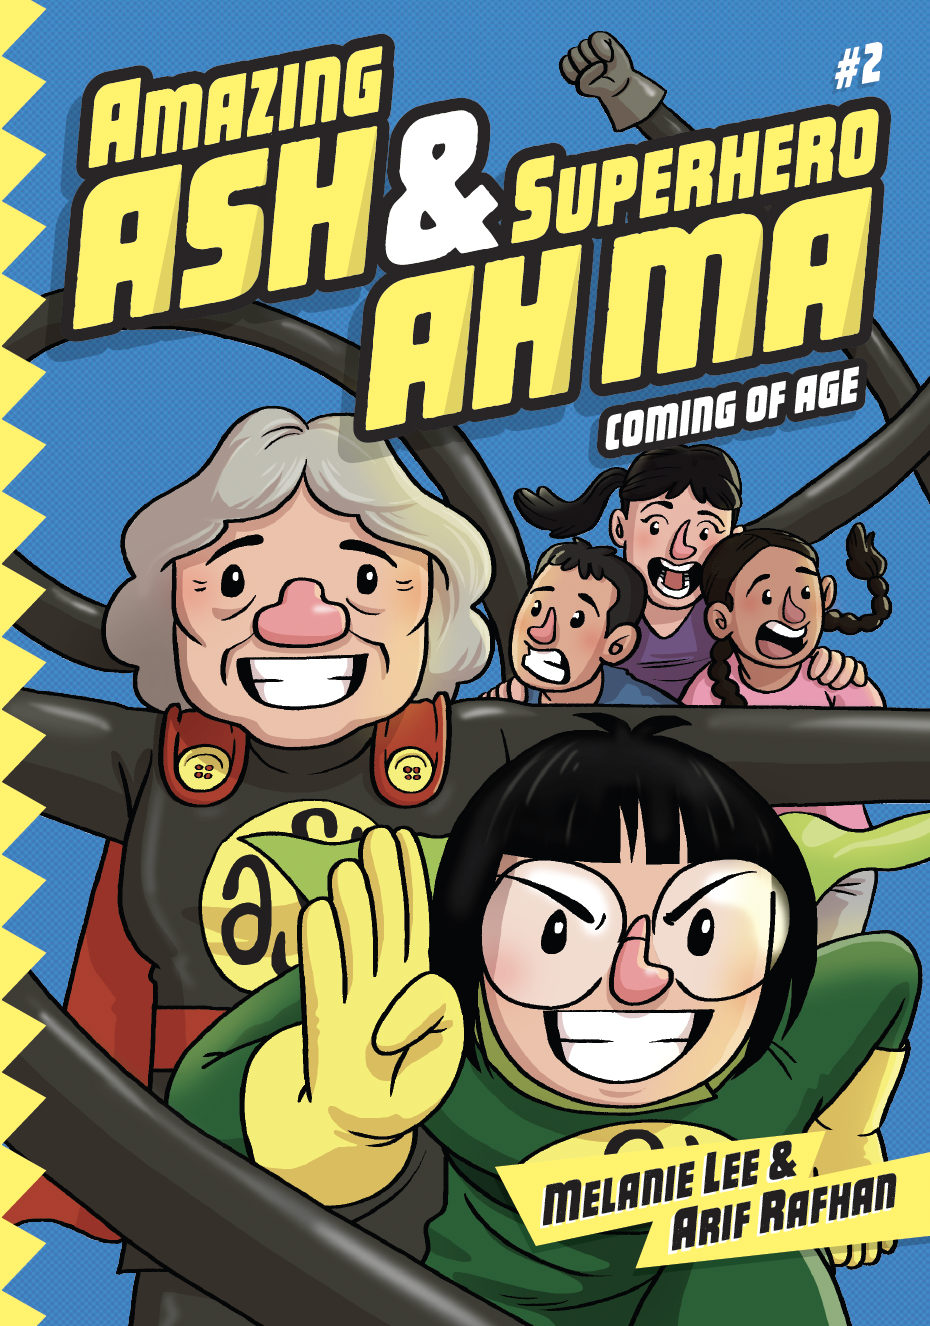 Amazing Ash and Superhero Ah Ma 2: Coming of Age. Written by Melanie Lee, Illustrated by Arif Rafhan